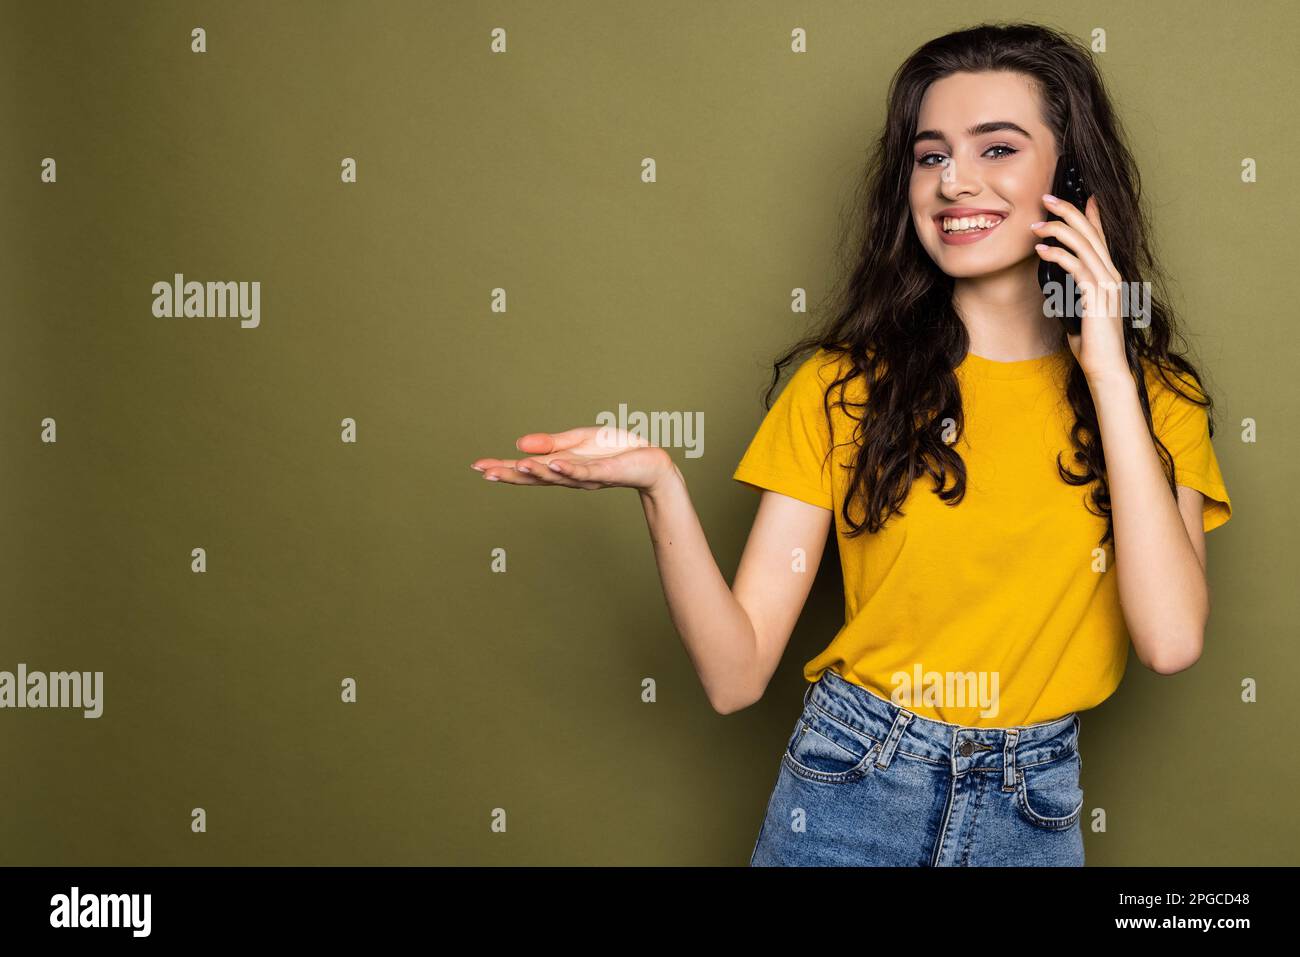 Young woman talk speak on mobile cell phone conducting pleasant conversation isolated on khaki background studio portrait. People lifestyle concept Stock Photo